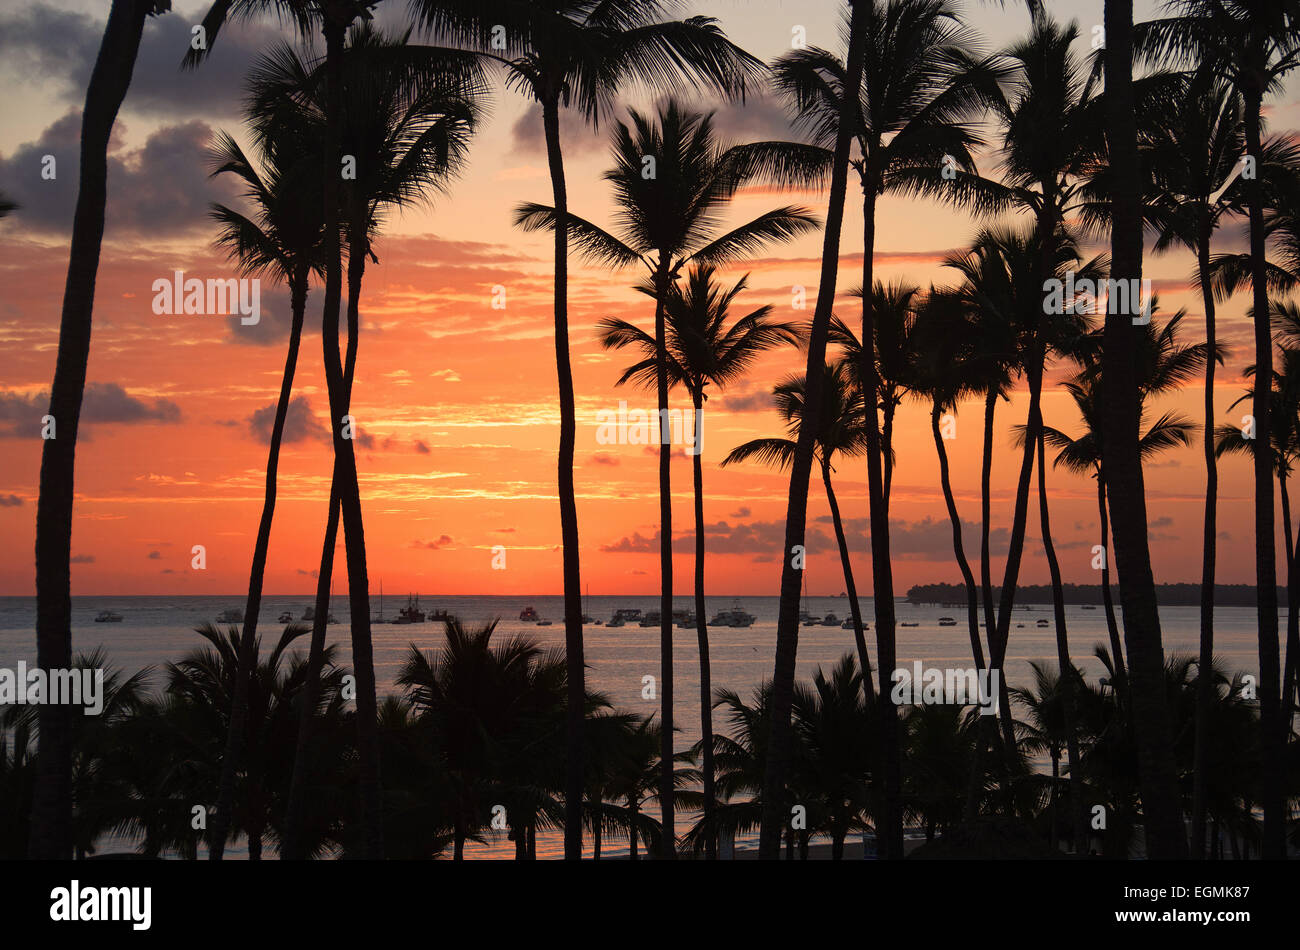 DOMINICAN REPUBLIC. The dawn sky just before sunrise, as seen from Punta Cana beach on the Atlantic coast. 2015. Stock Photo